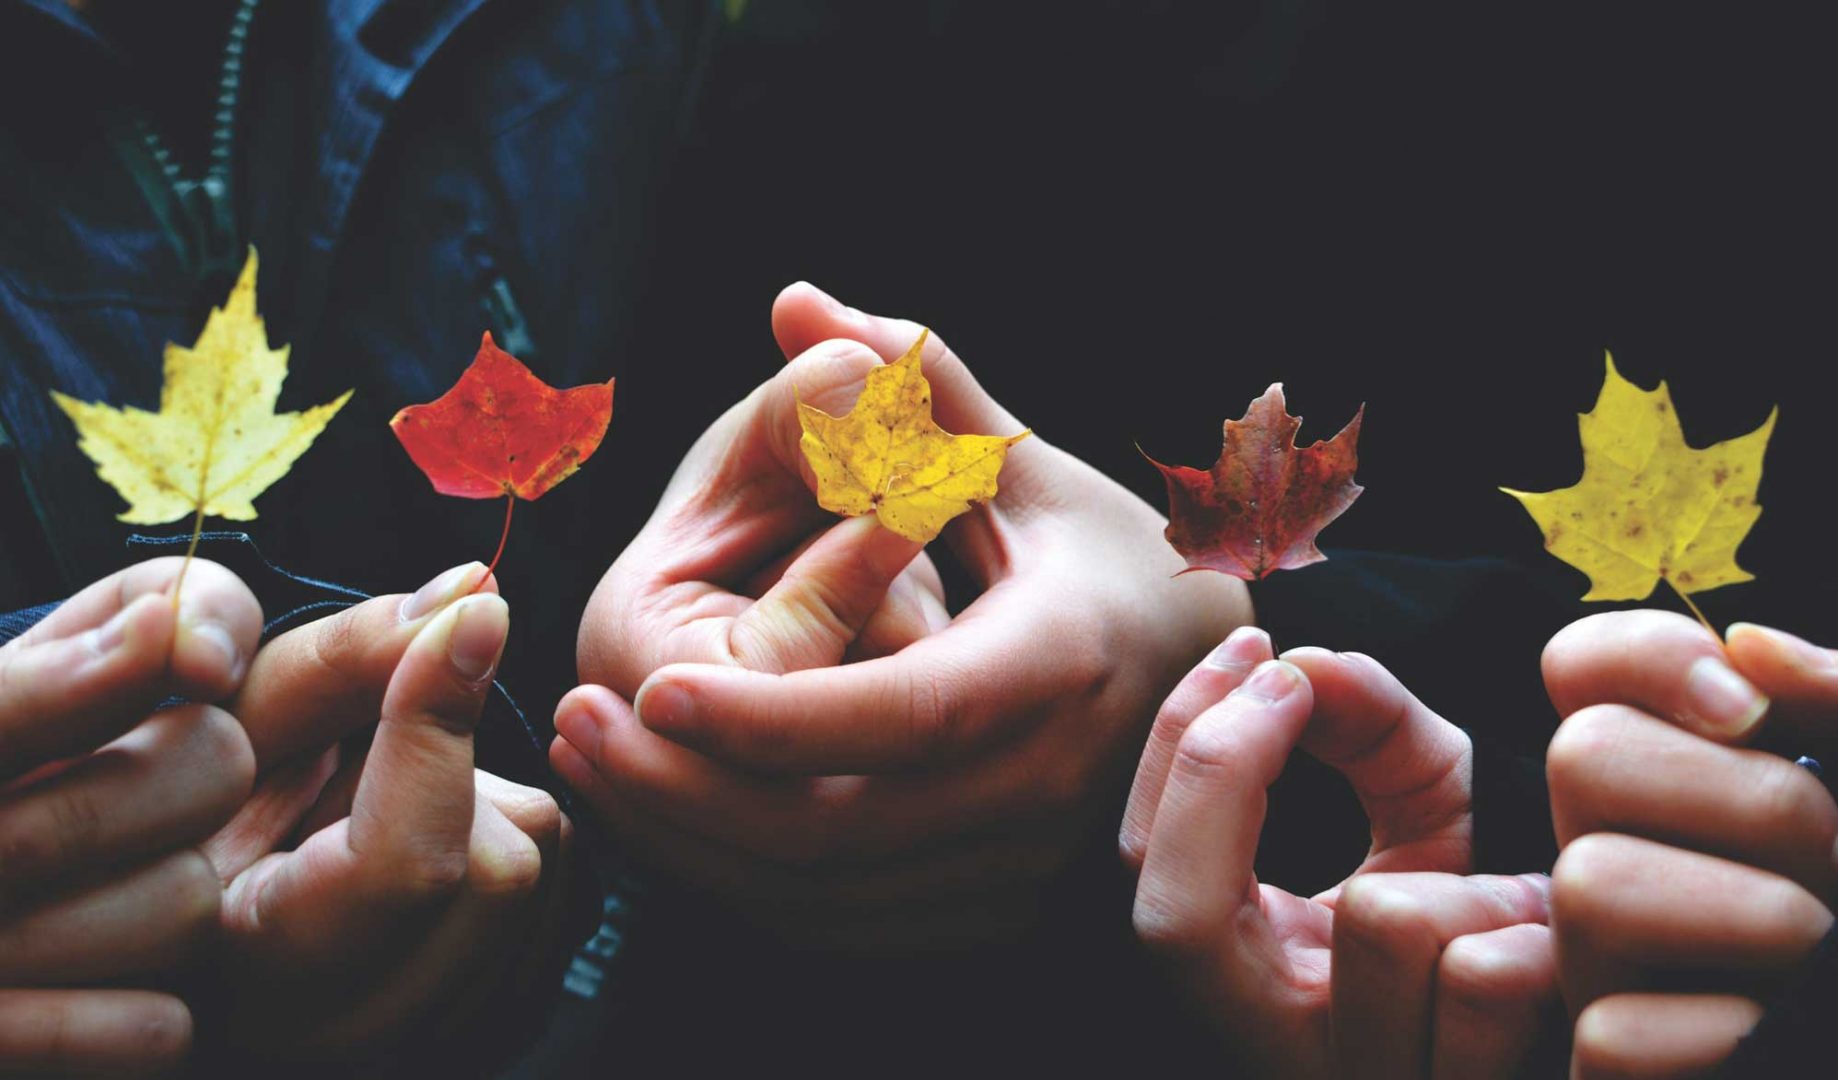 Hands holding autumnal leaves